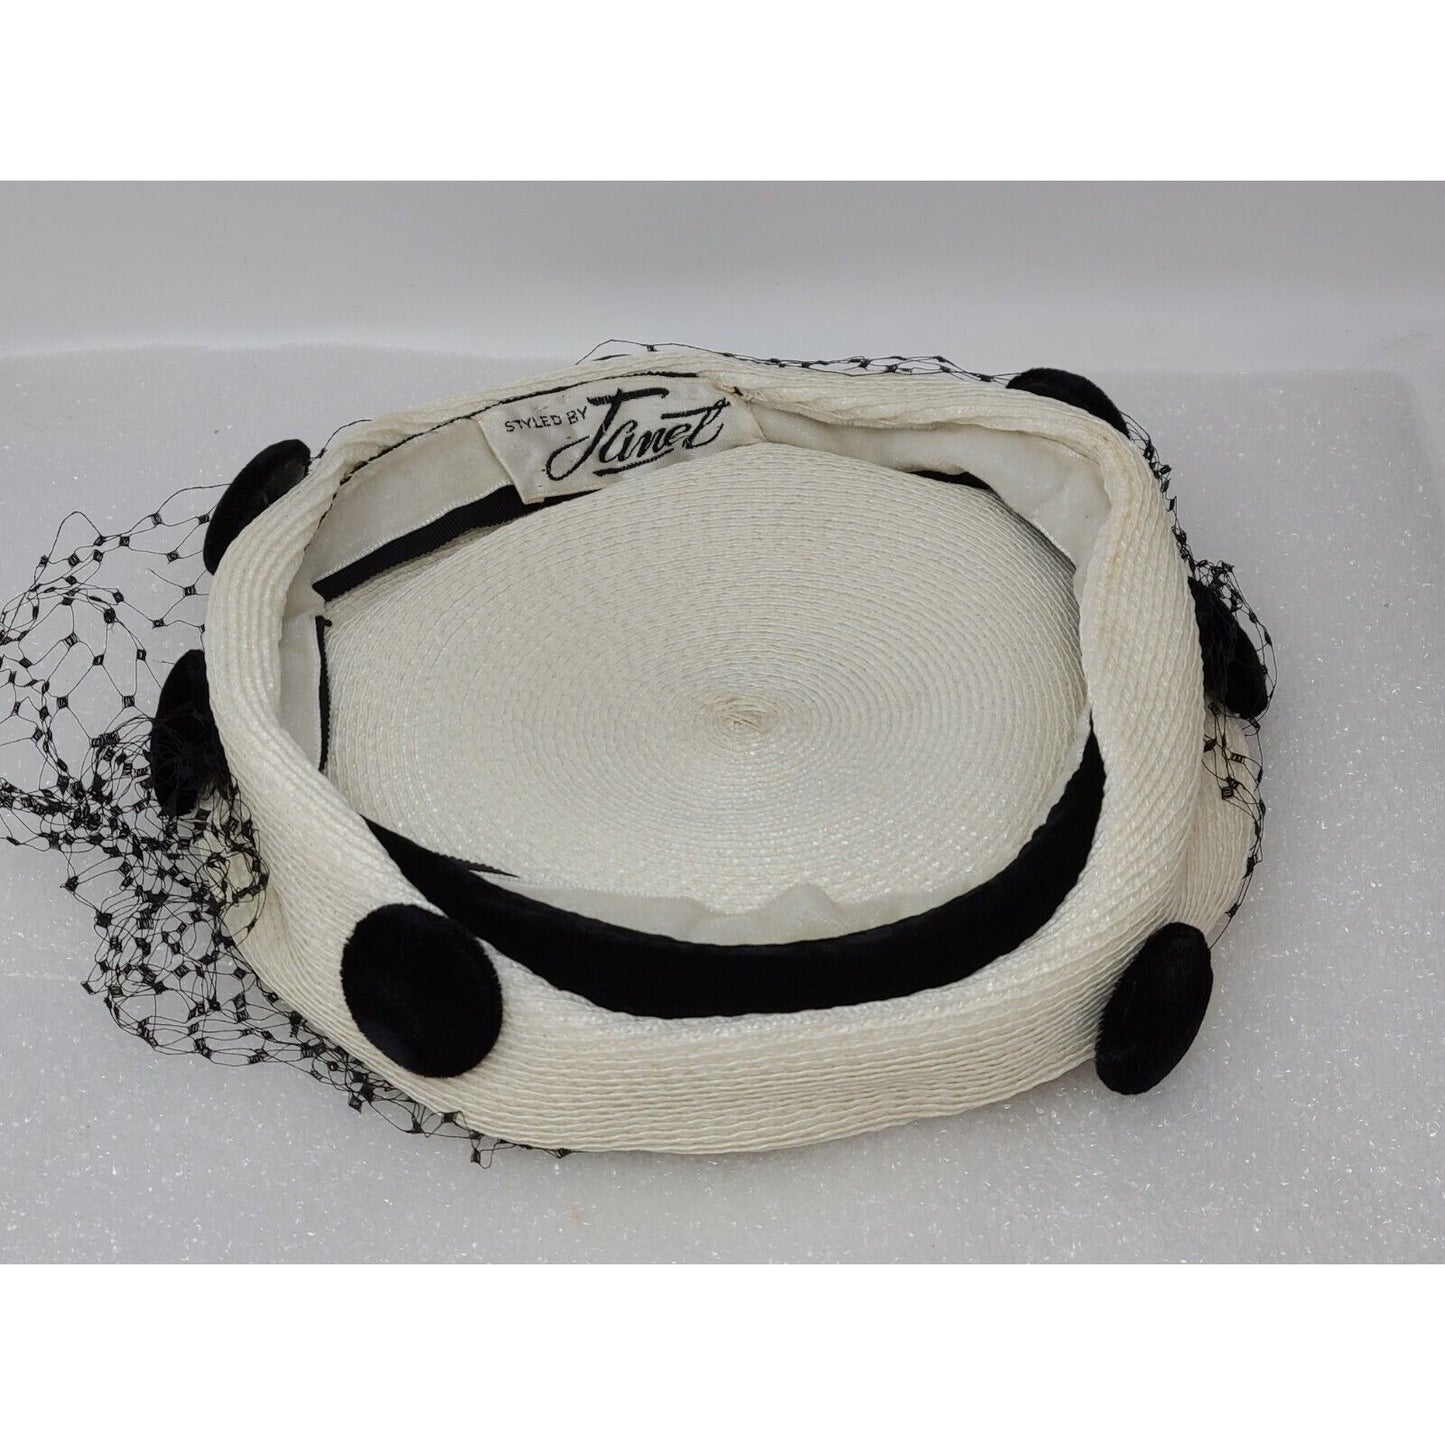 Vintage Styled by Janet Women's Hat White & Black